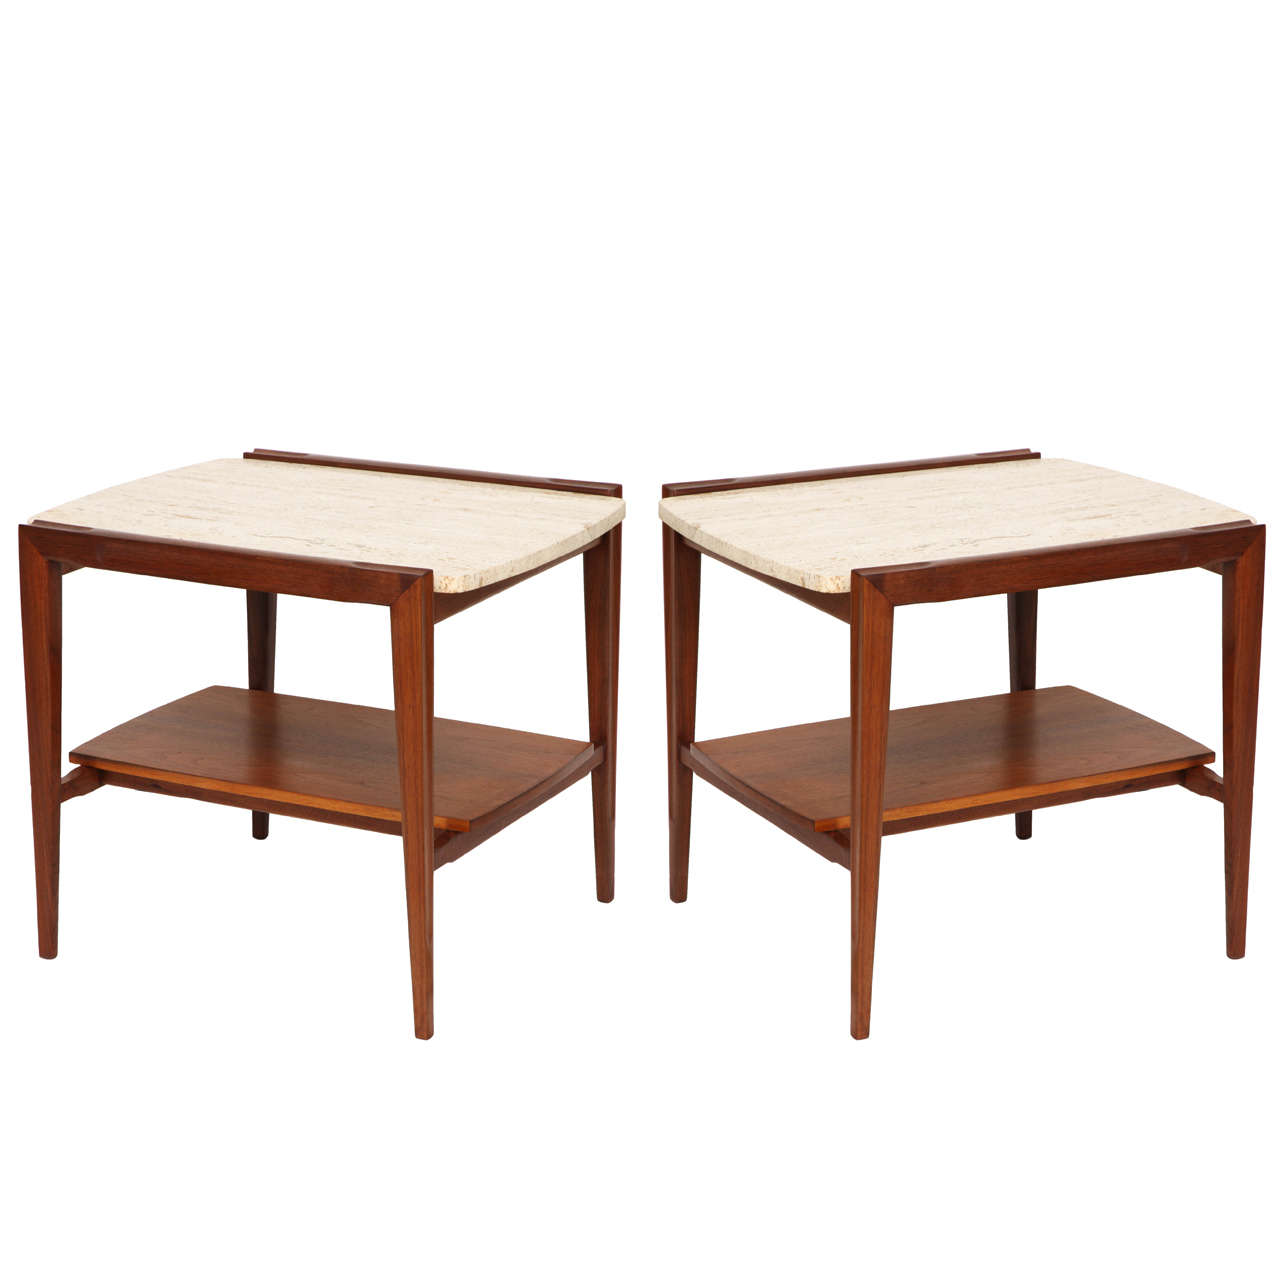 Pair of 1960s Travertine-Top Lamp Tables